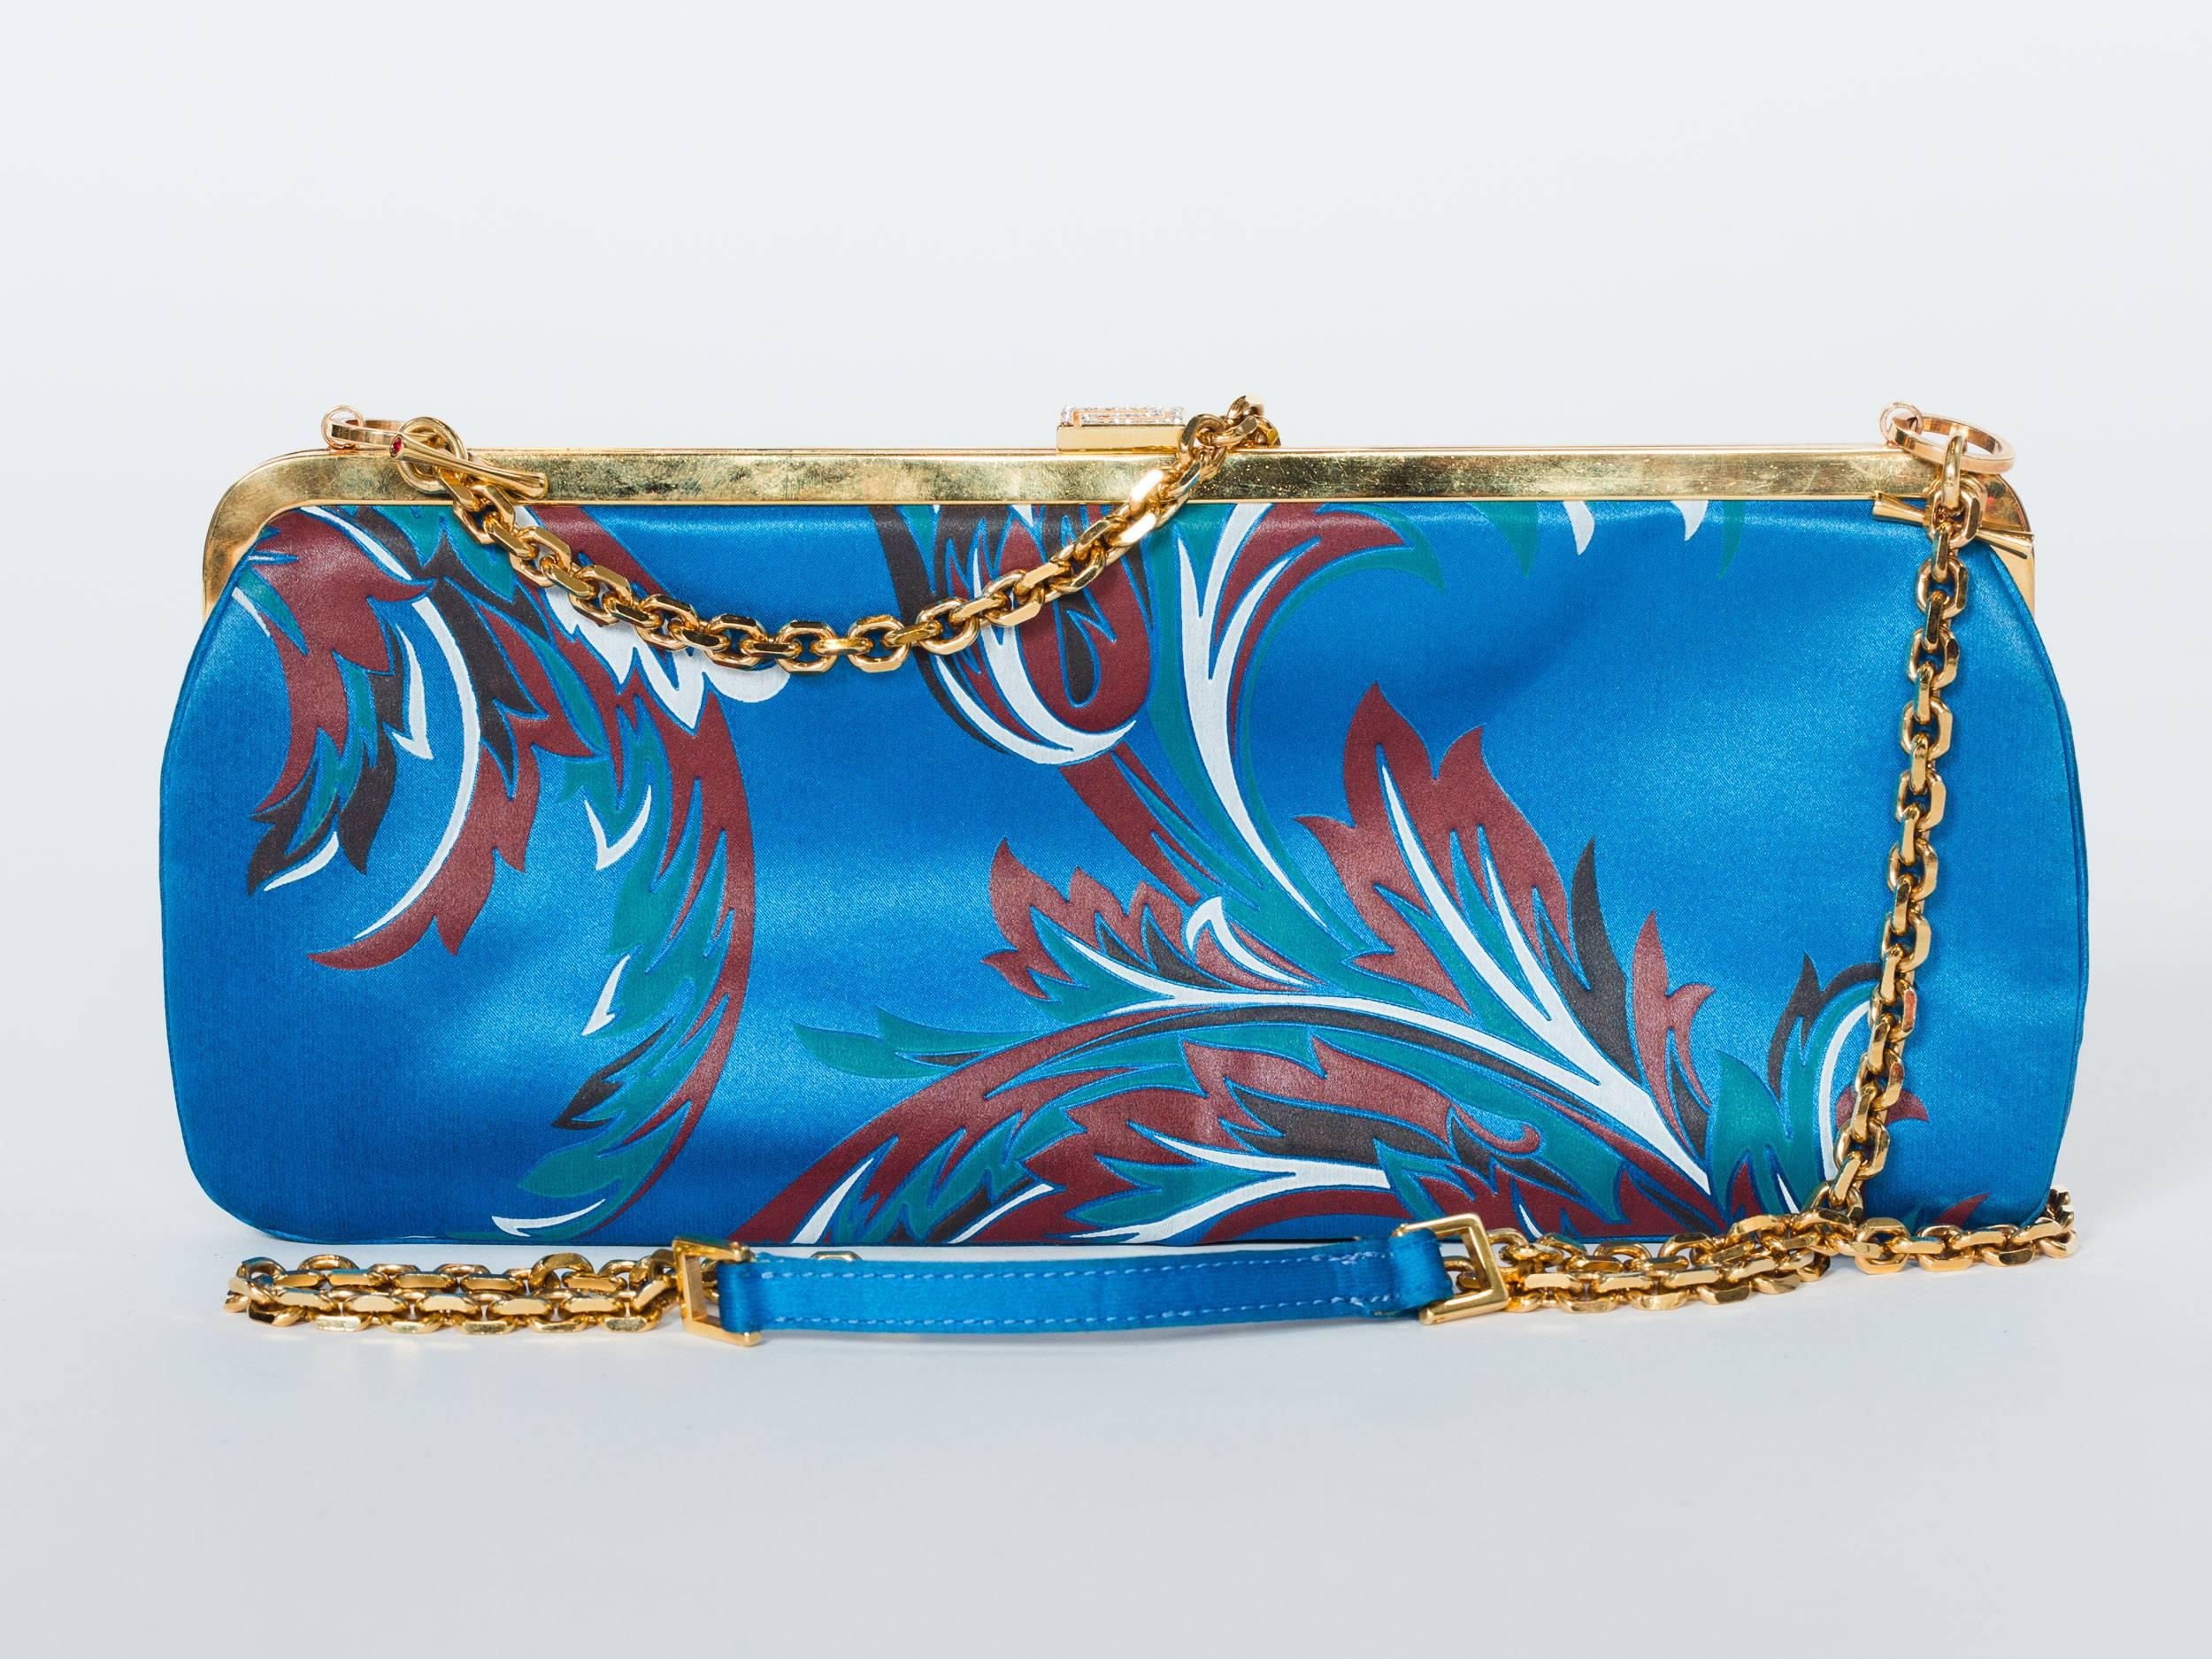 Blue 1990S GIANNI VERSACE Baroque Satin Clutch With Gold Chain Strap & Crystals Hand